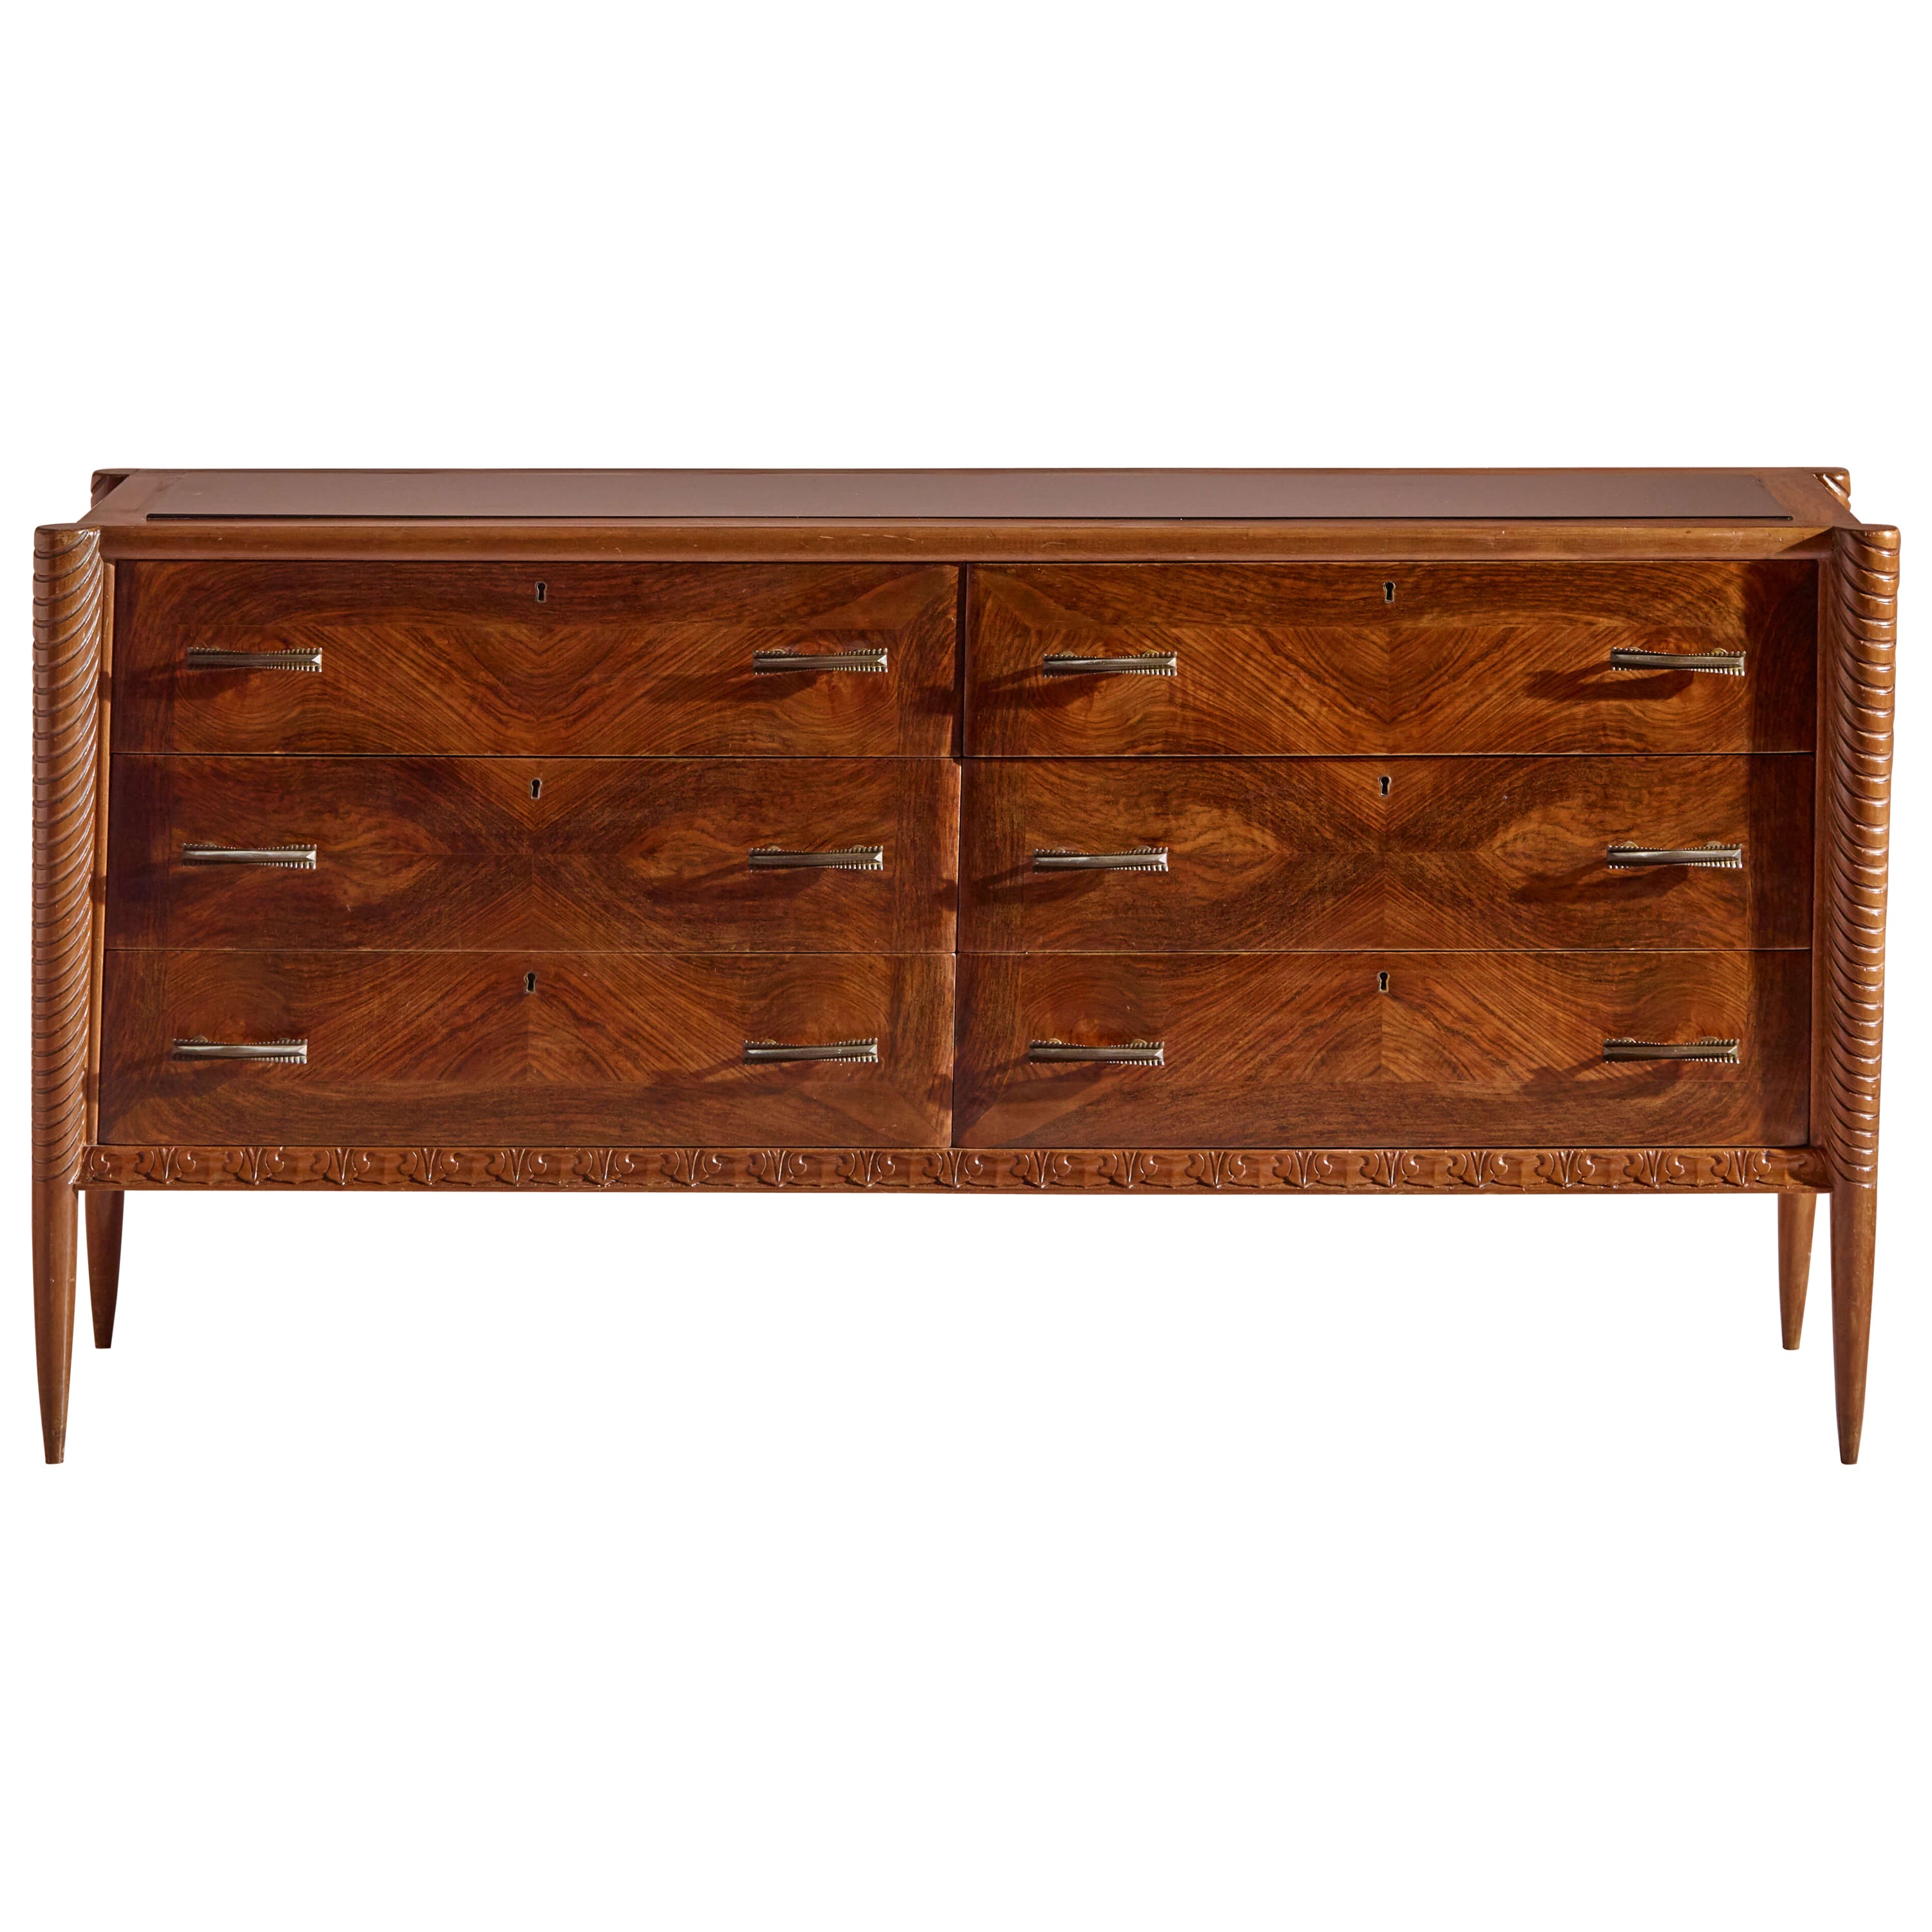 An Italian walnut sculpted chest of drawers with black glass top from the 1940s